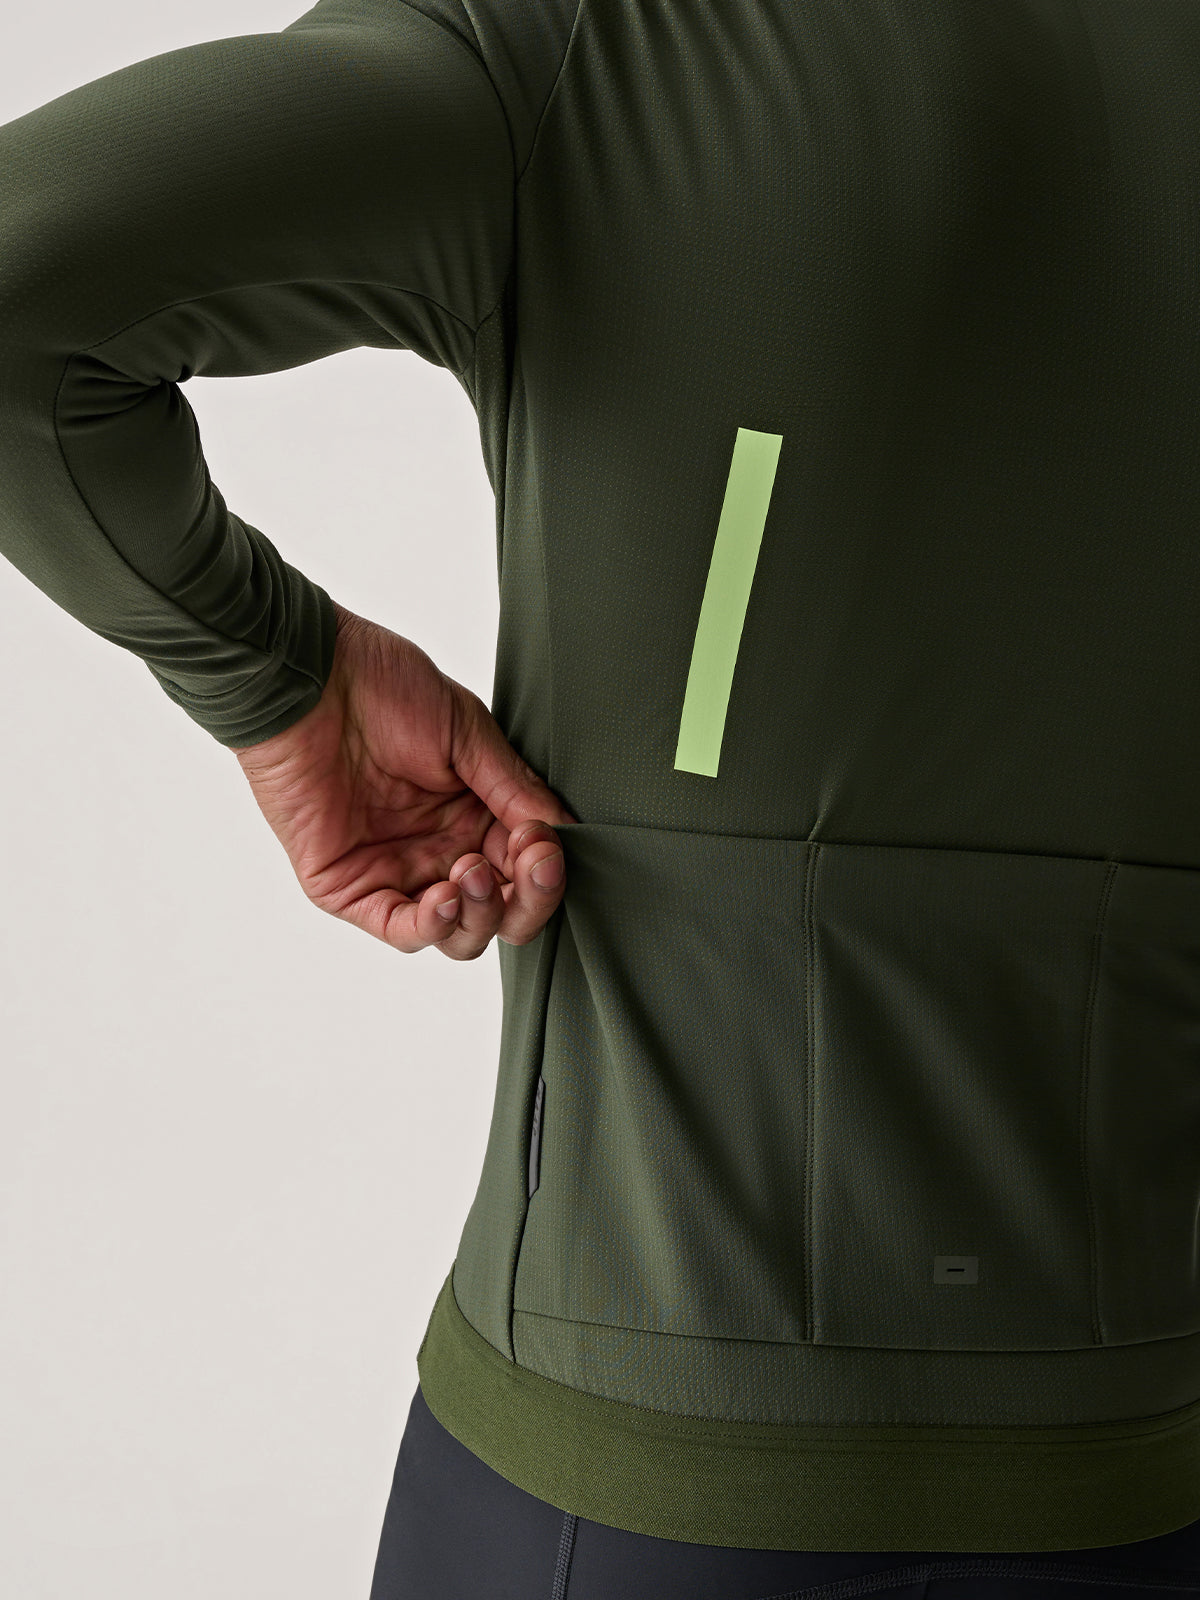 Evade Thermal LS Jersey 2.0 - Bronze Green | Enroute.cc